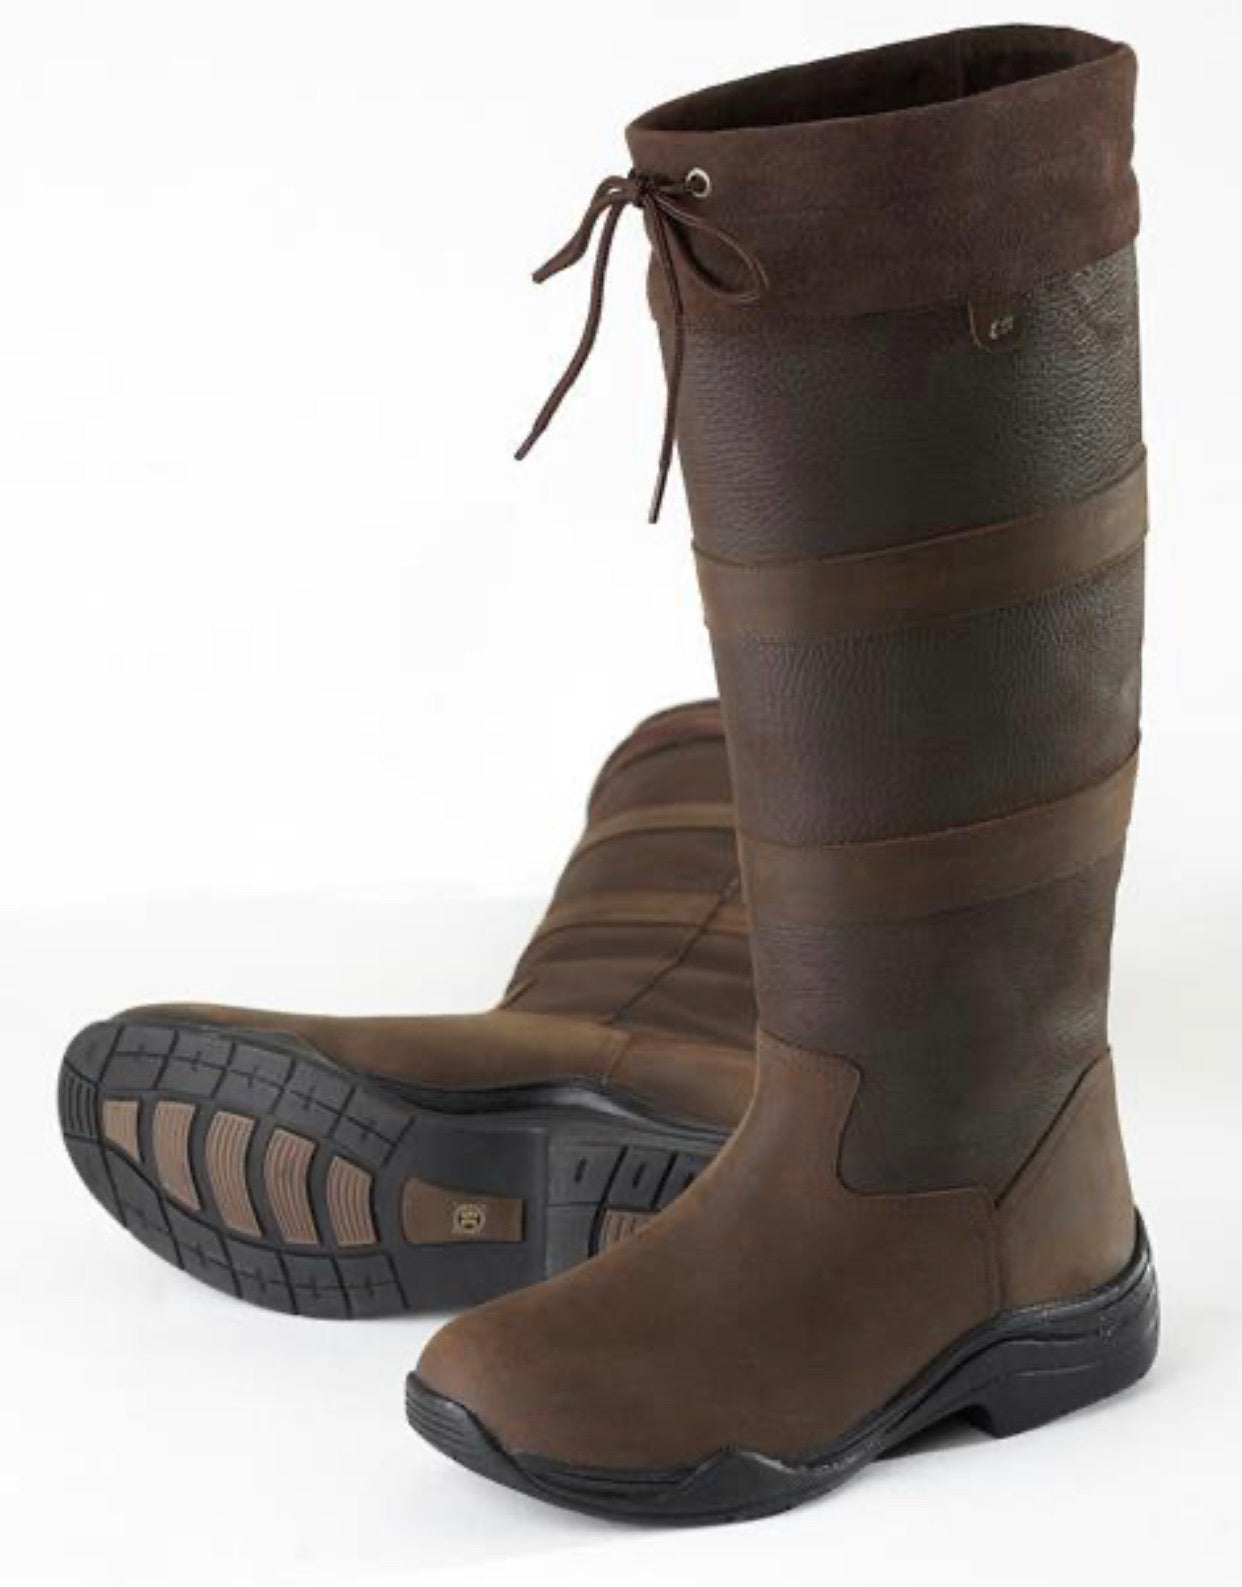 San Remo Long Boots Brown - Restock Coming Soon